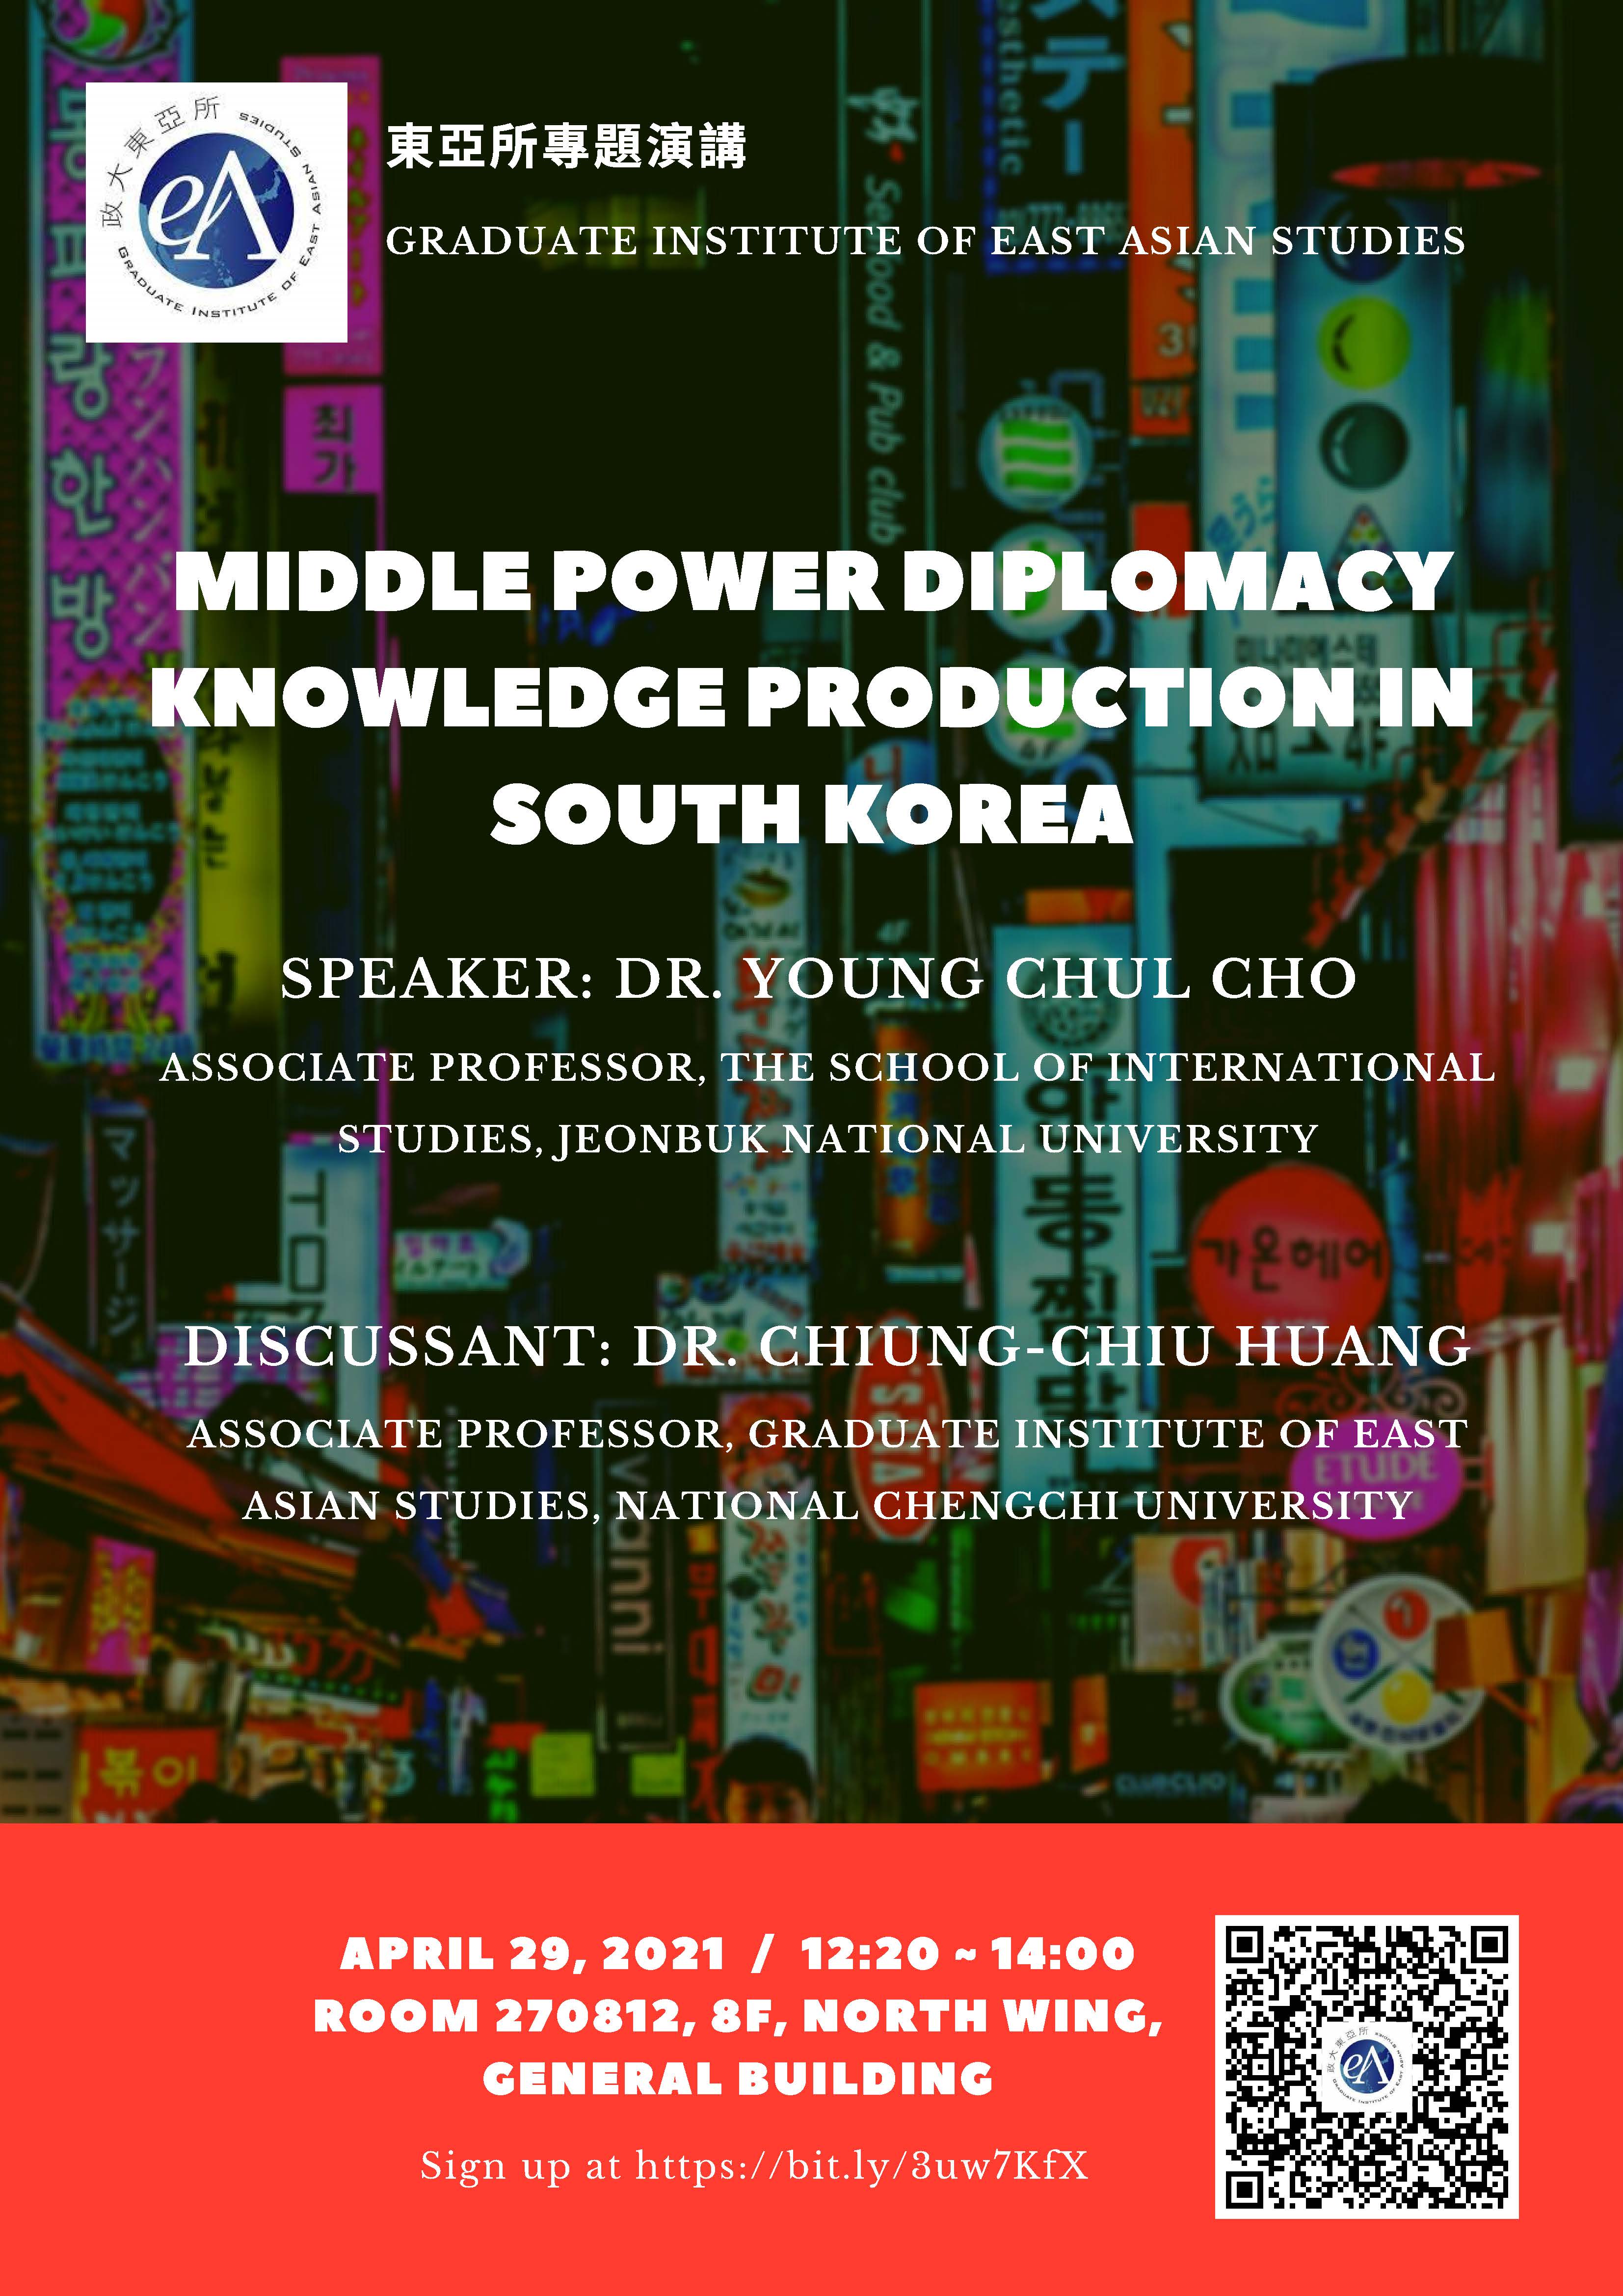 Lecture: Middle Power Diplomacy Knowledge Production in South Korea